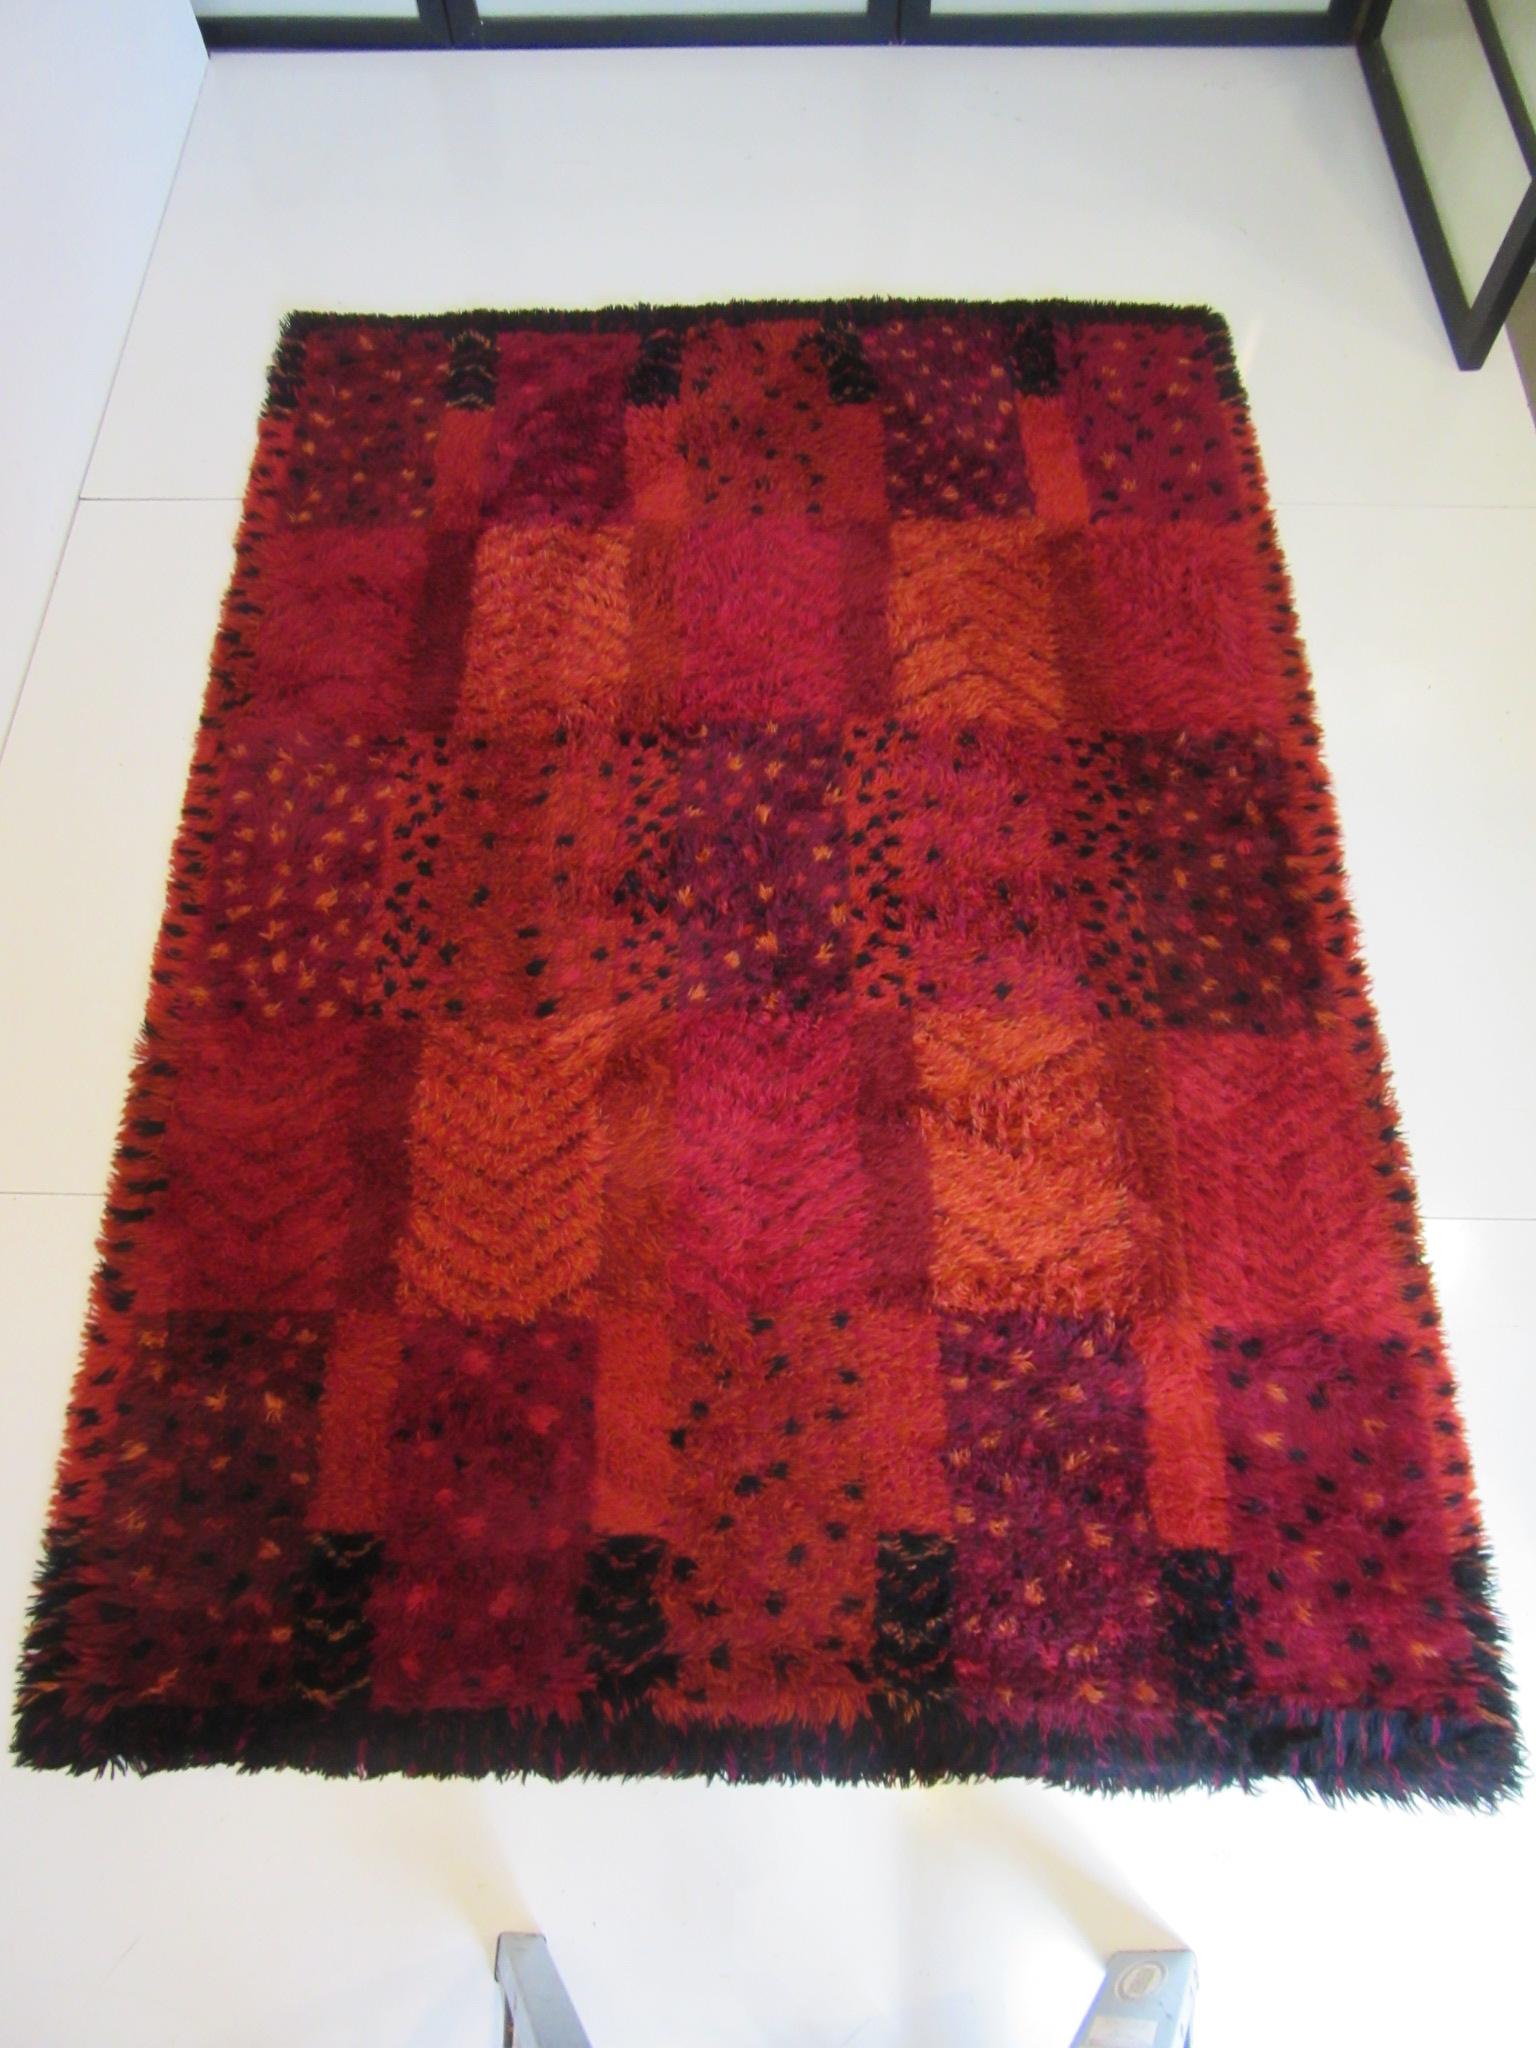 A well woven high pile Rya rug in a mult mix of reds, black and deep toned scarlet / purple called Alvastra red. Designed by Mairanne Richter (1916-2010) who worked closely with famed artist designer Marta Maas Fjetterstrom at the Helsing Borg